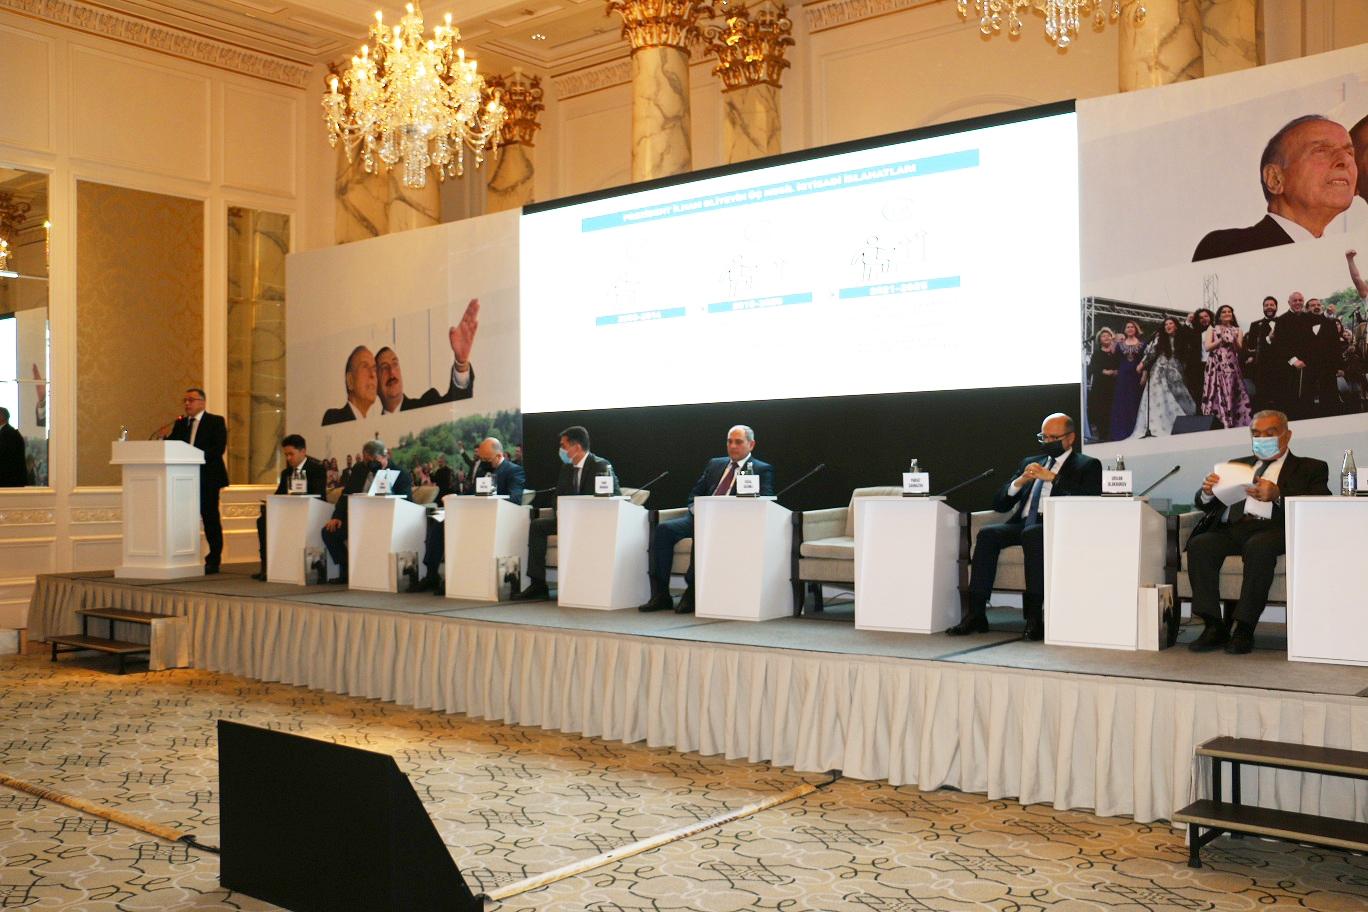 Conference on "Azerbaijan's development model: Yesterday, today and tomorrow" has been held with the organization of New Azerbaijan Party and partnership of Center for Analysis of Economic Reforms and Communication